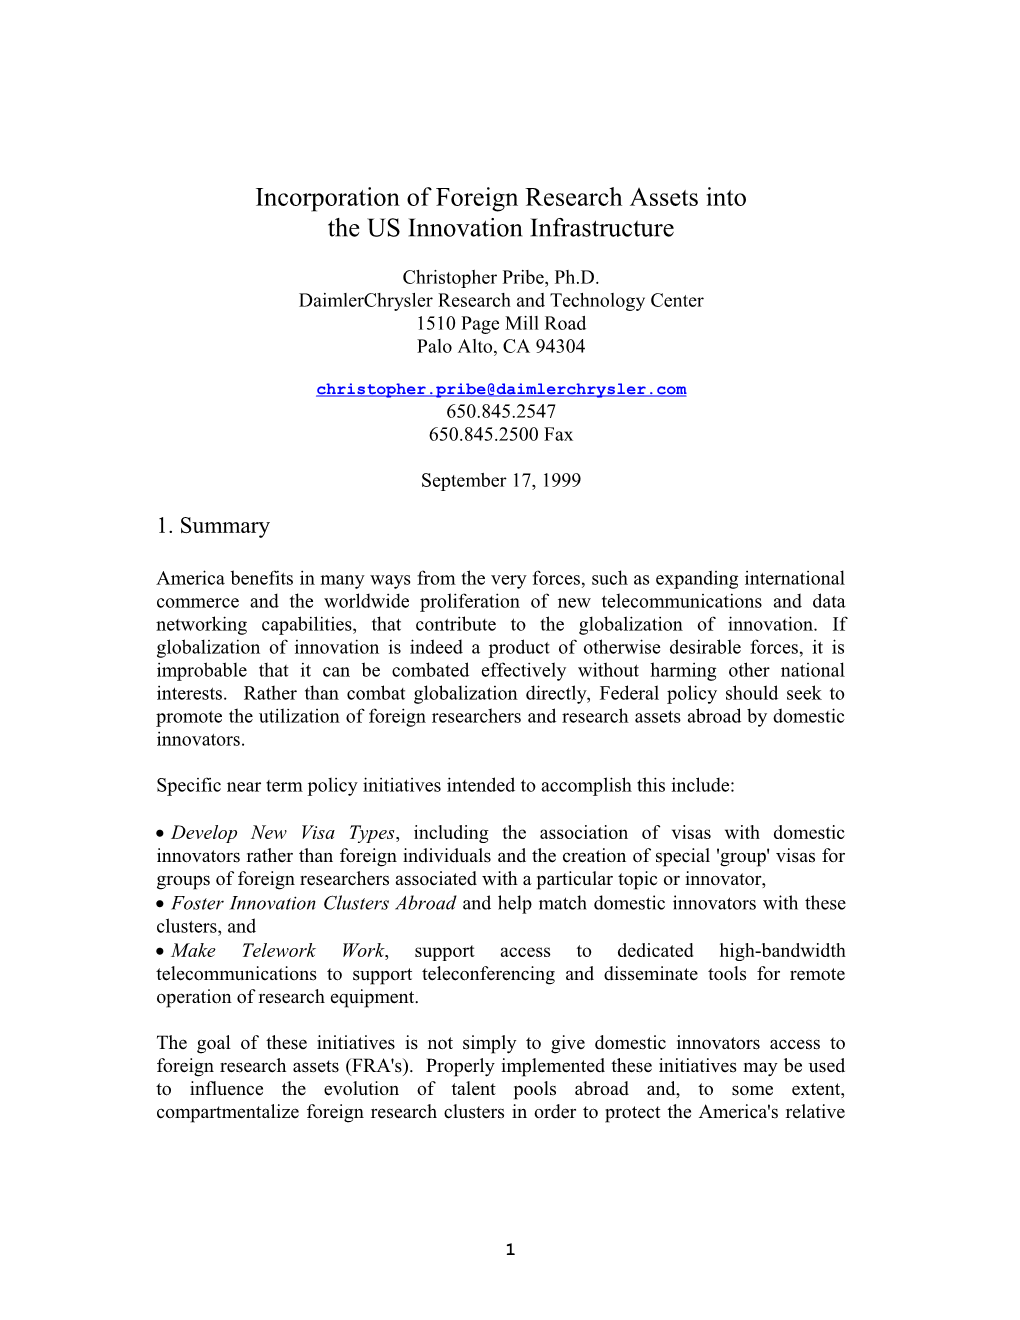 Incorporation of Foreign Research Assets Into